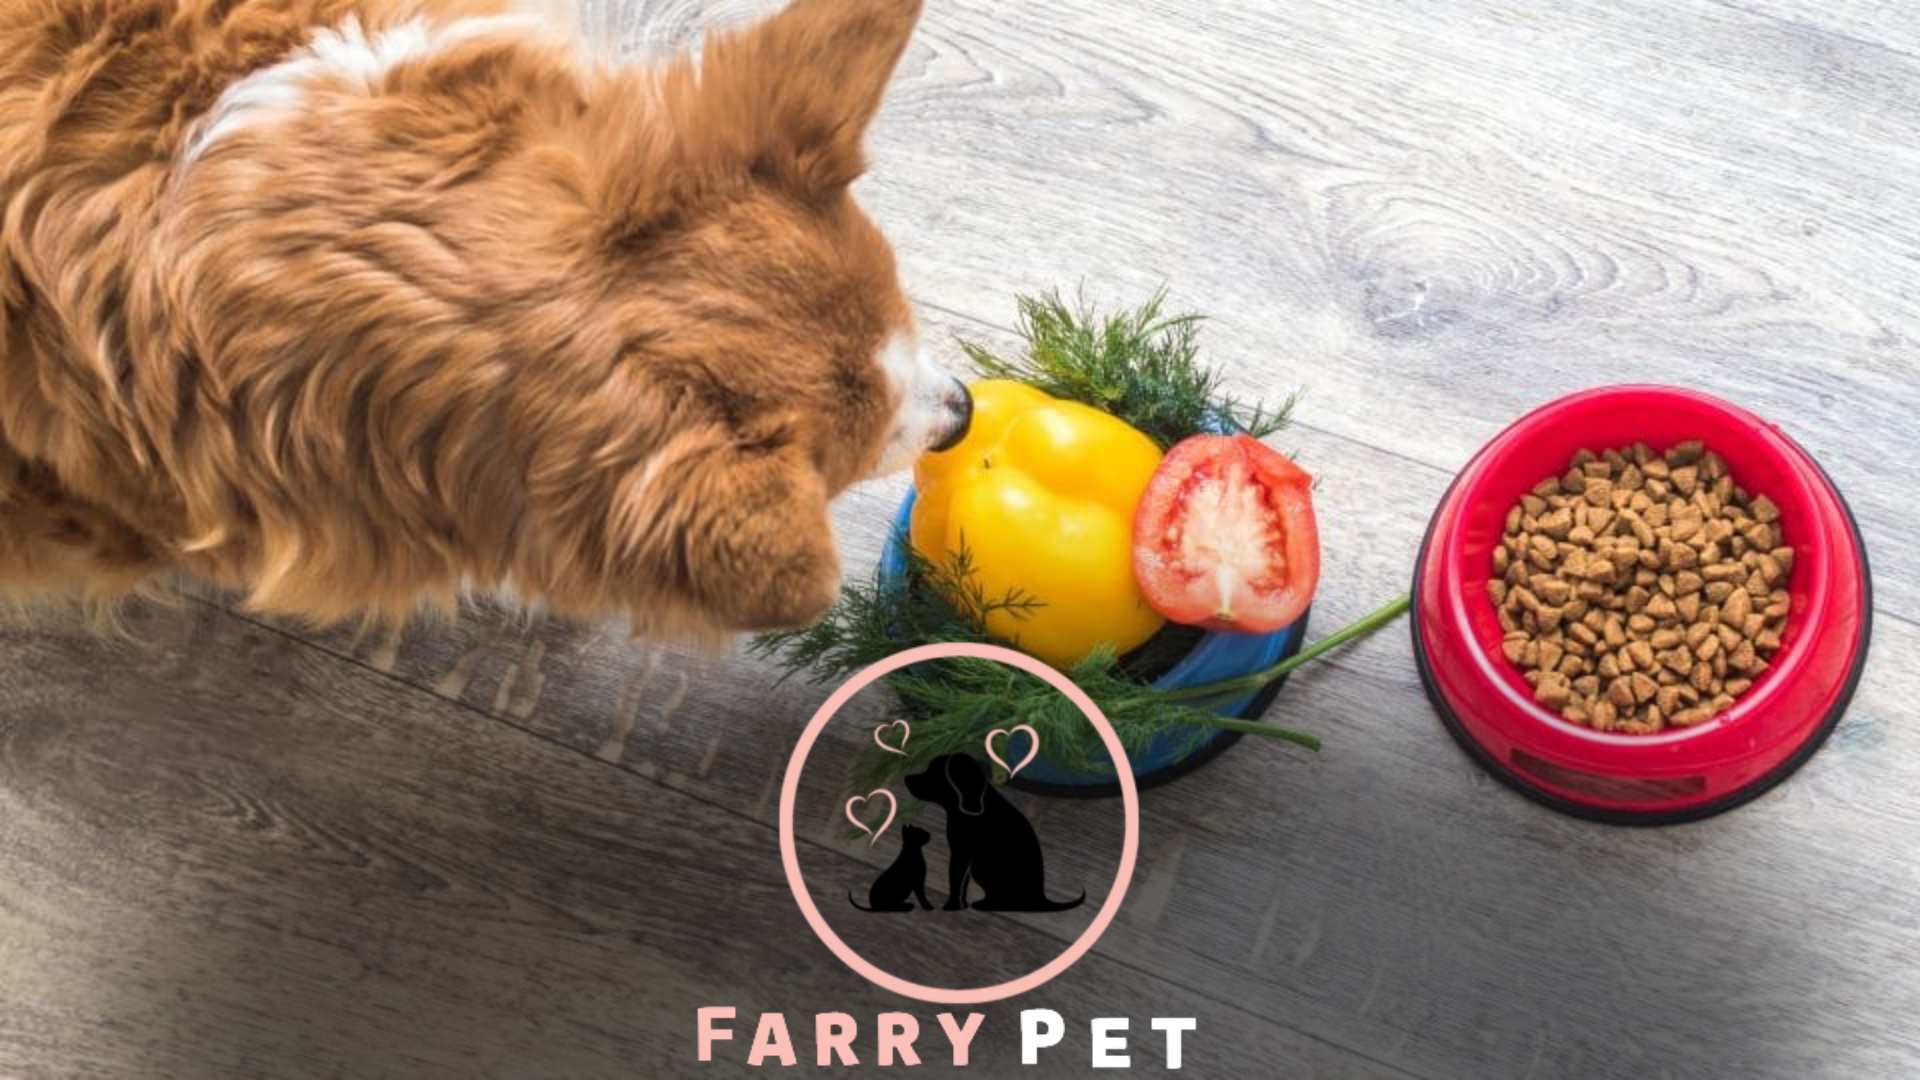 Animal Farm Discount Pet Foods: Providing Affordable Nutrition for Your Beloved Pets